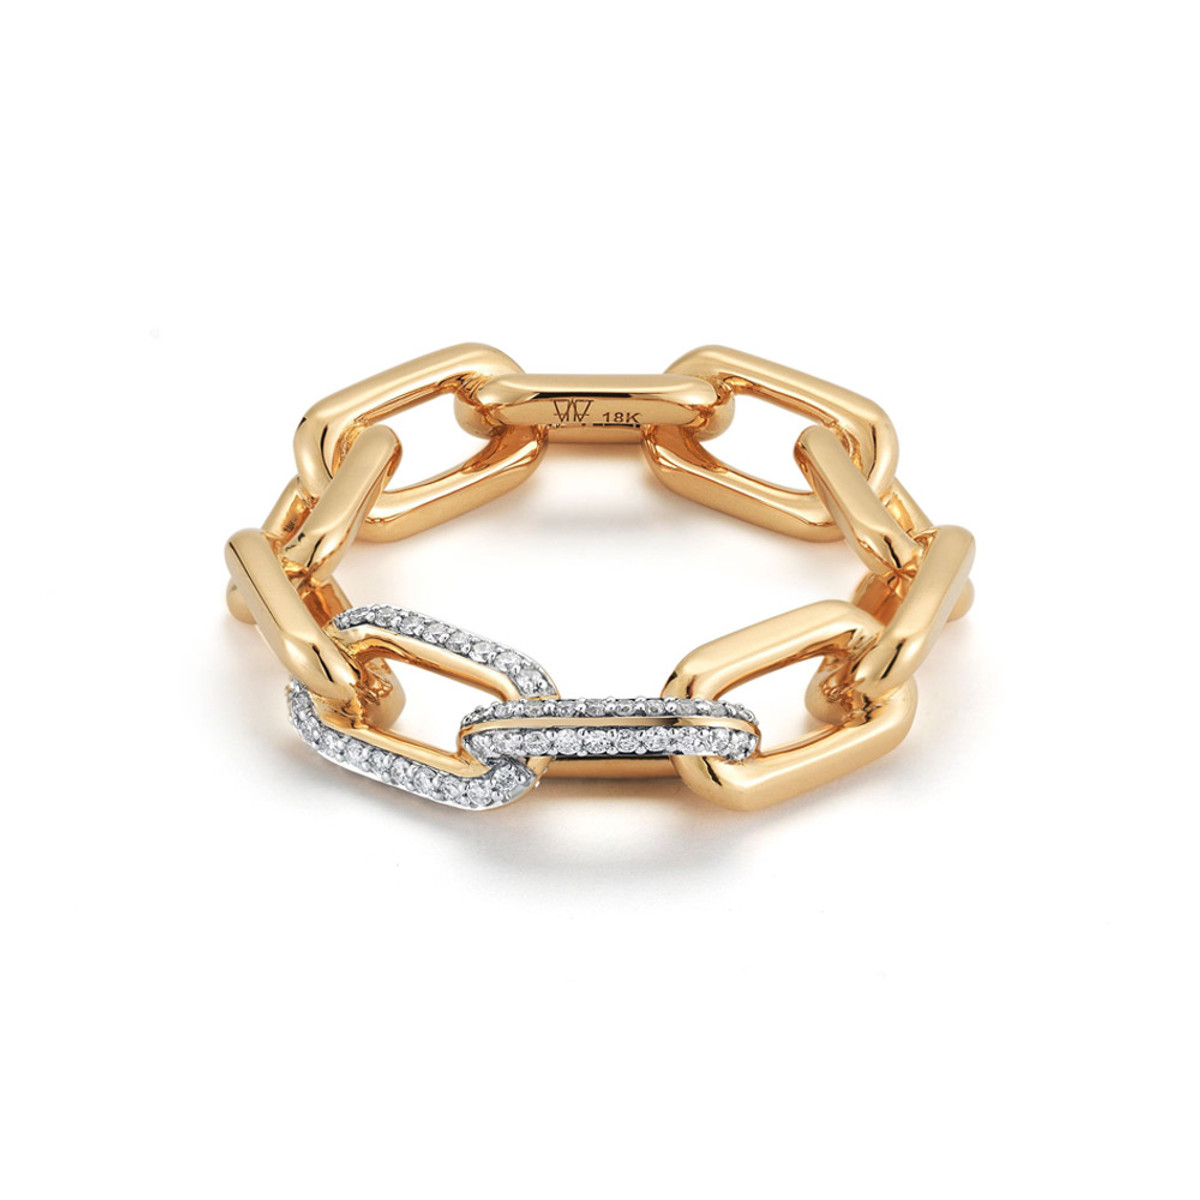 Walters Faith Saxon 18K Yellow Gold Double Diamond Large Chain Link Ring, Size 6.5-56170